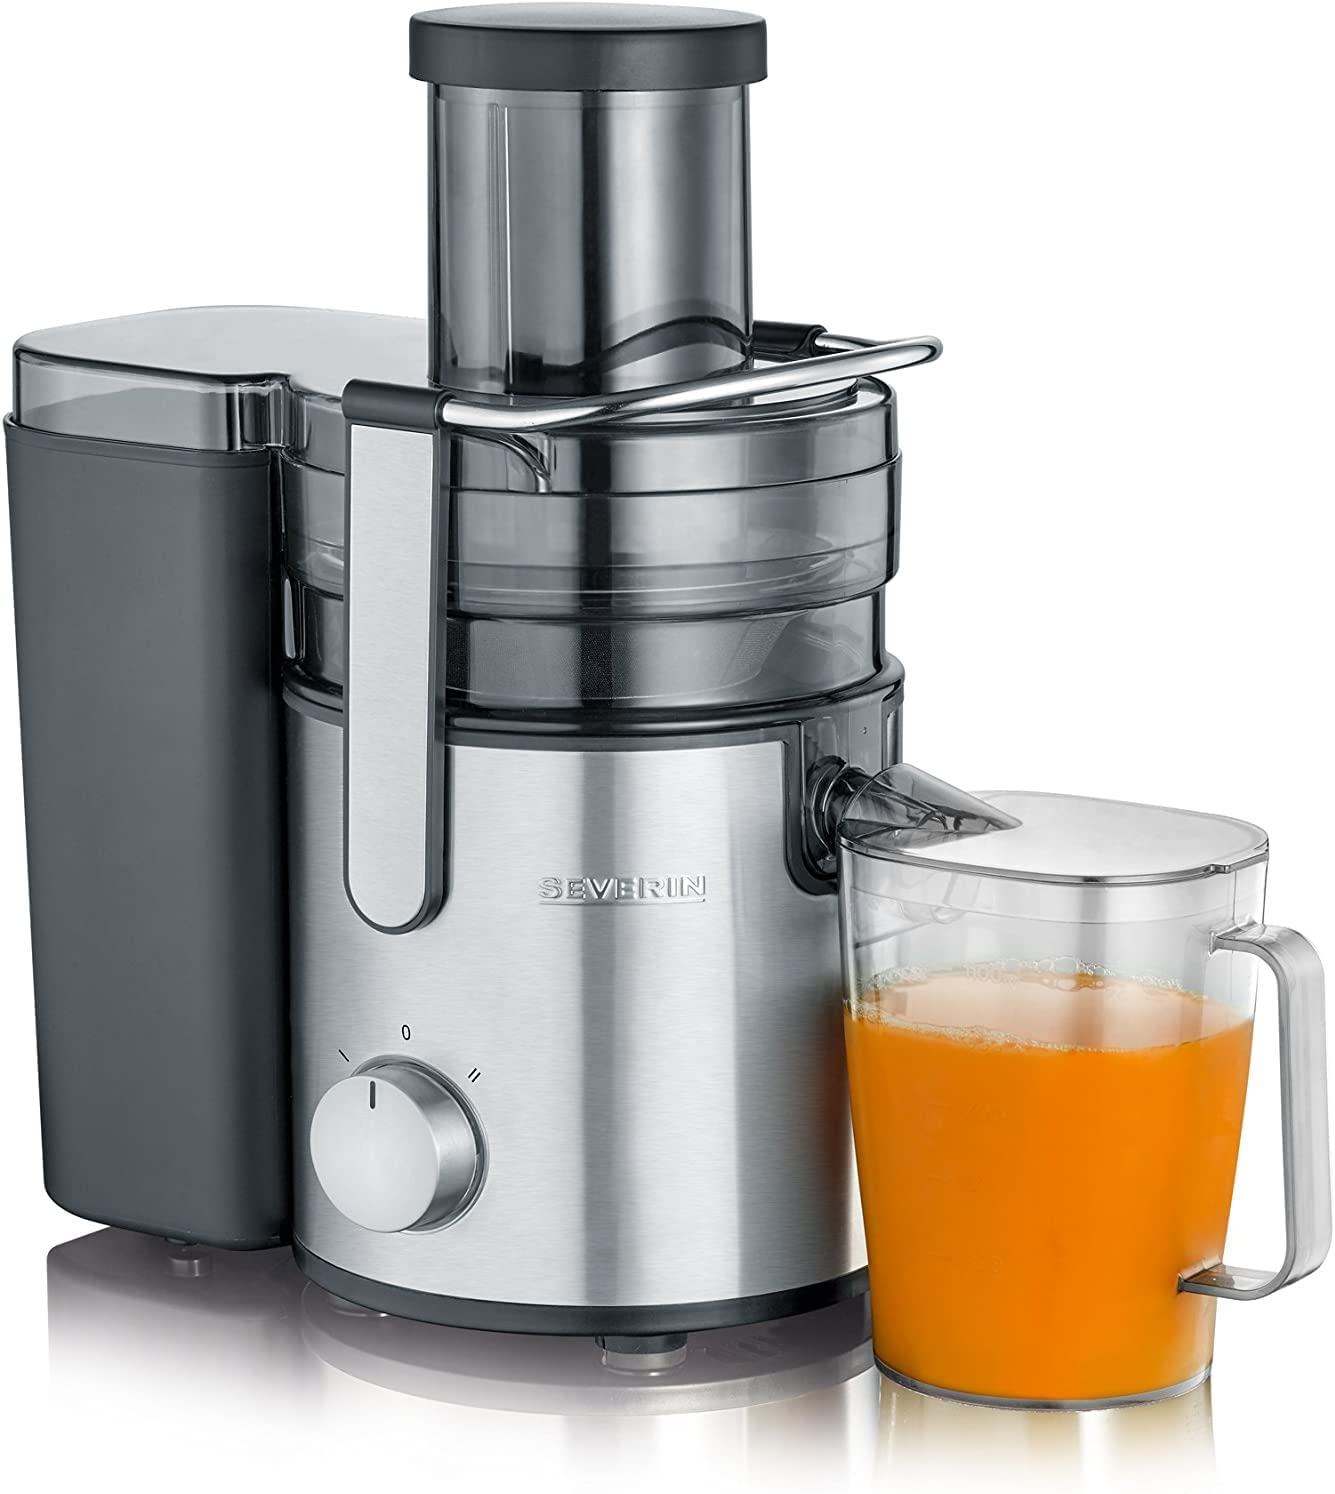 SEVERIN ES 3570 juicer (800 W, with 1.1 L juice container) black / stainless steel